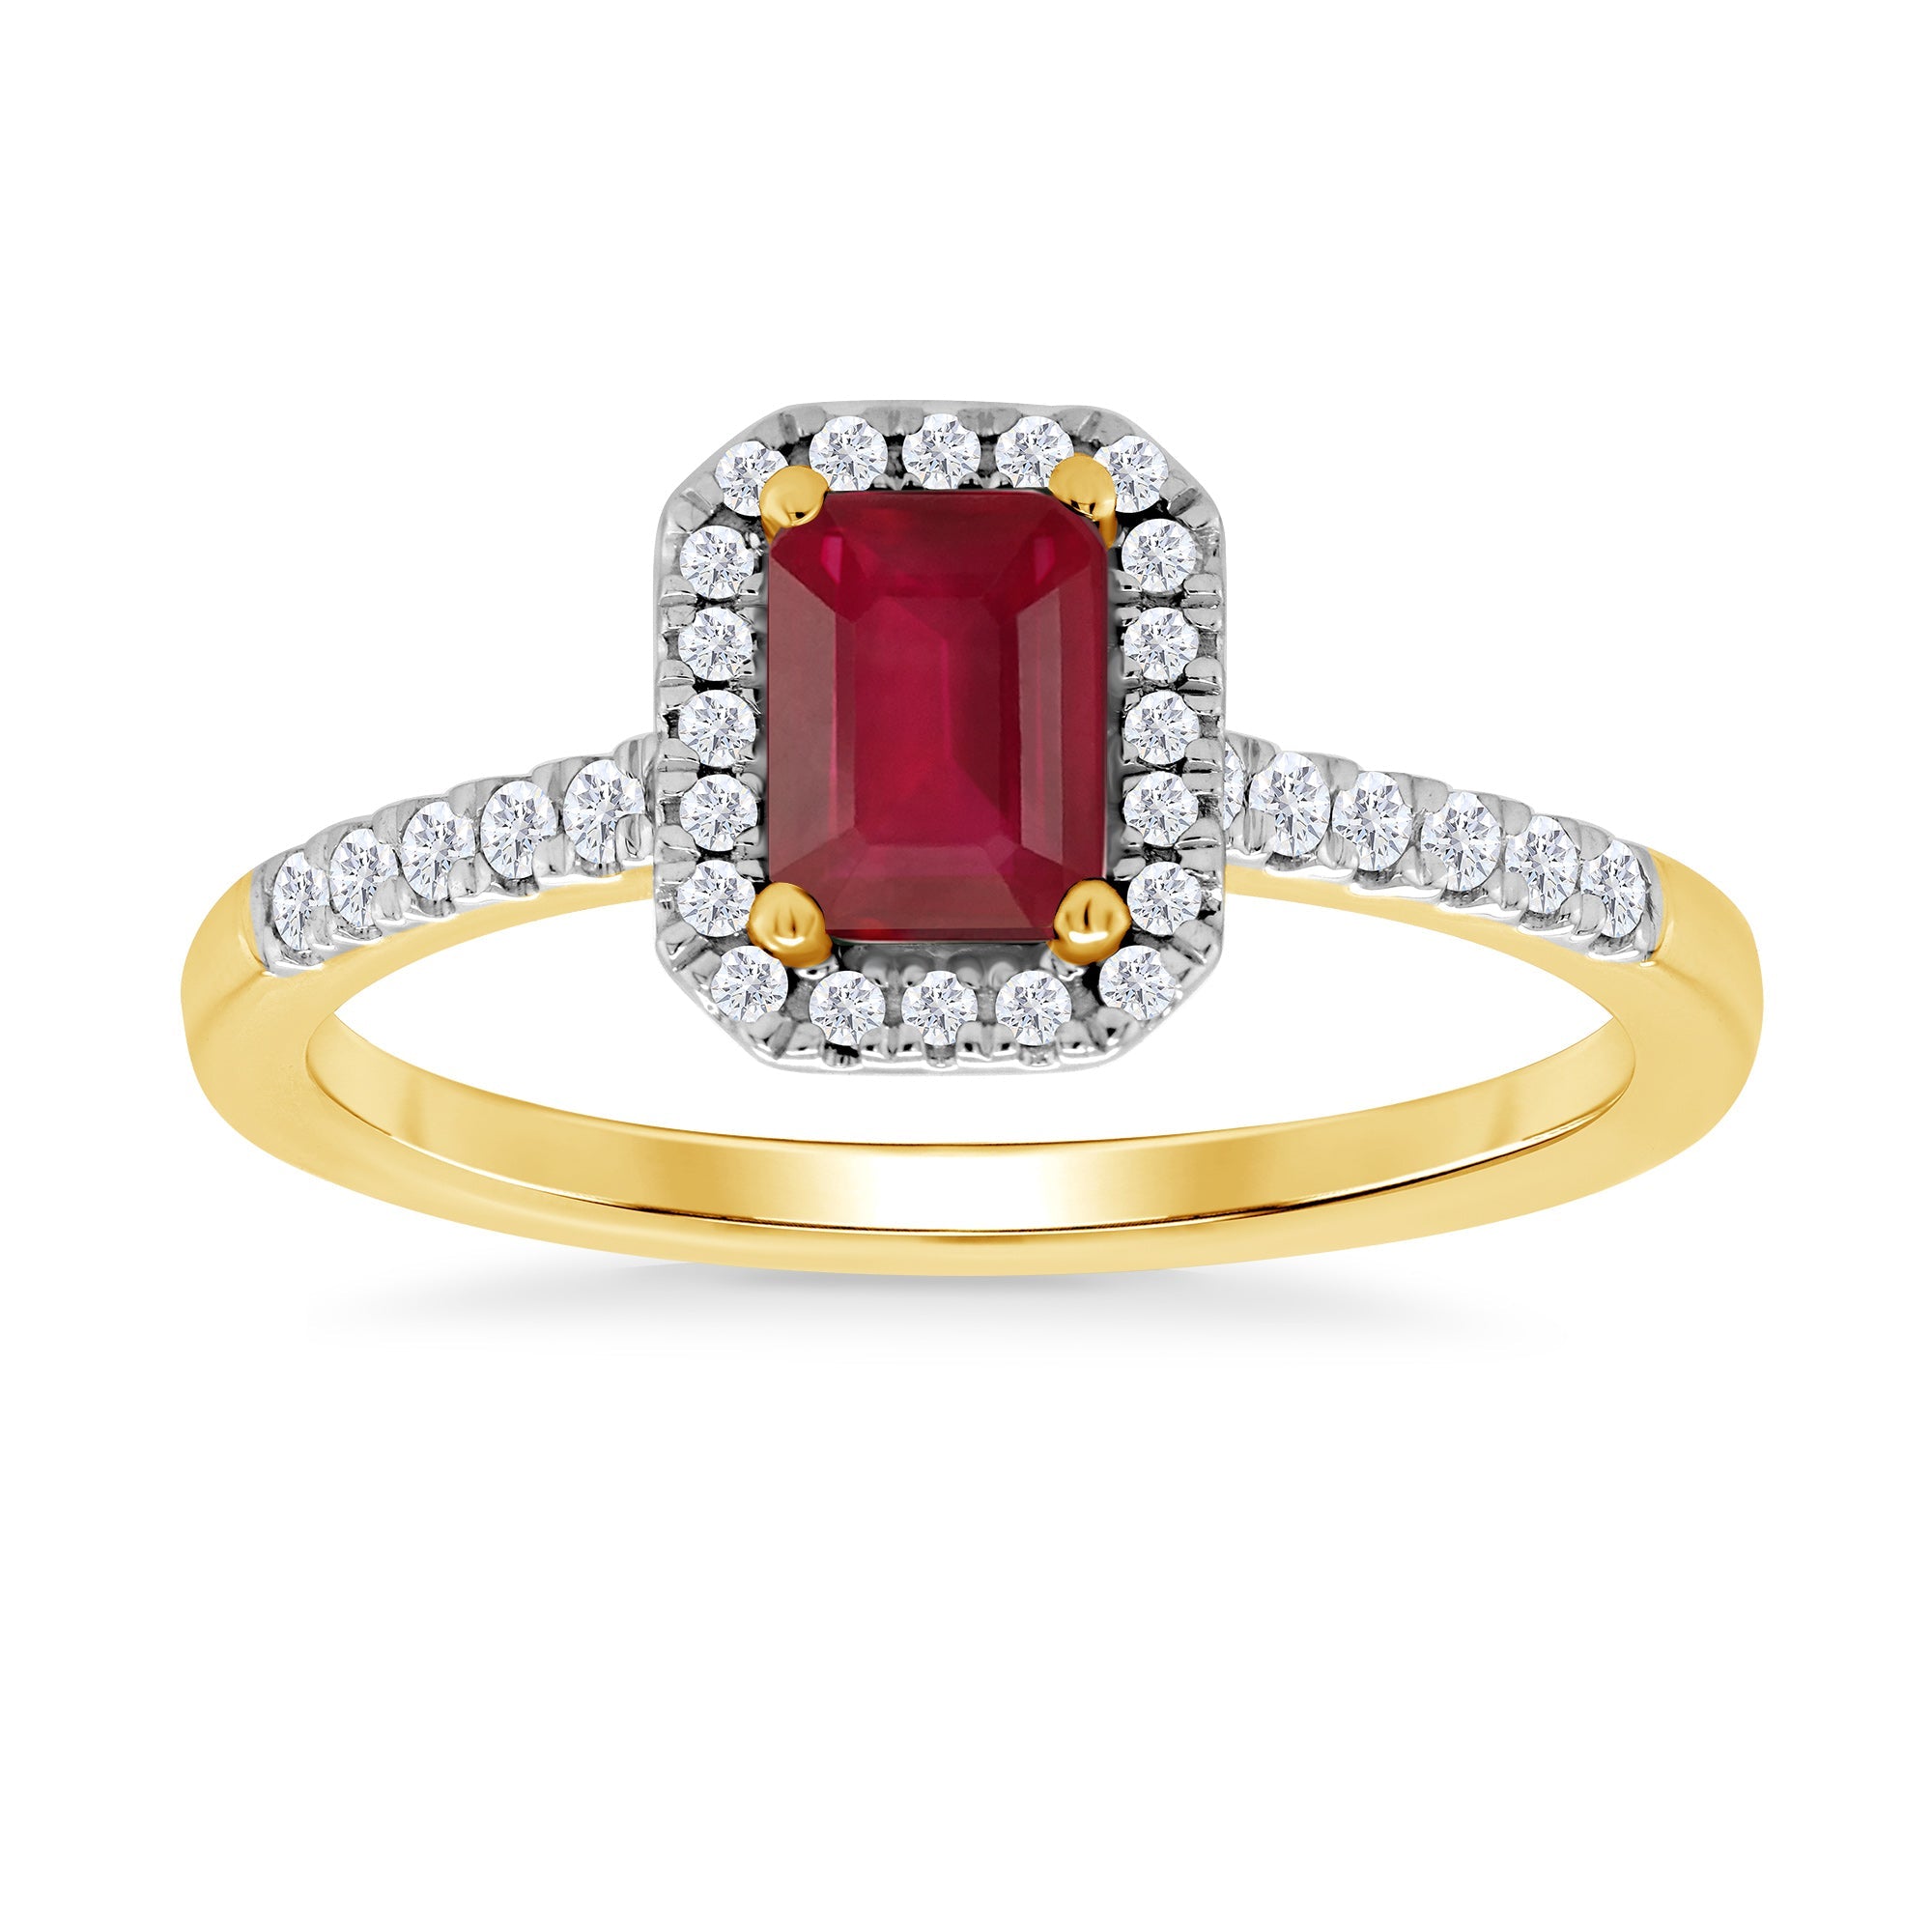 9ct gold 6x4mm octagon ruby & diamond cluster ring with diamond set shoulders 0.20ct